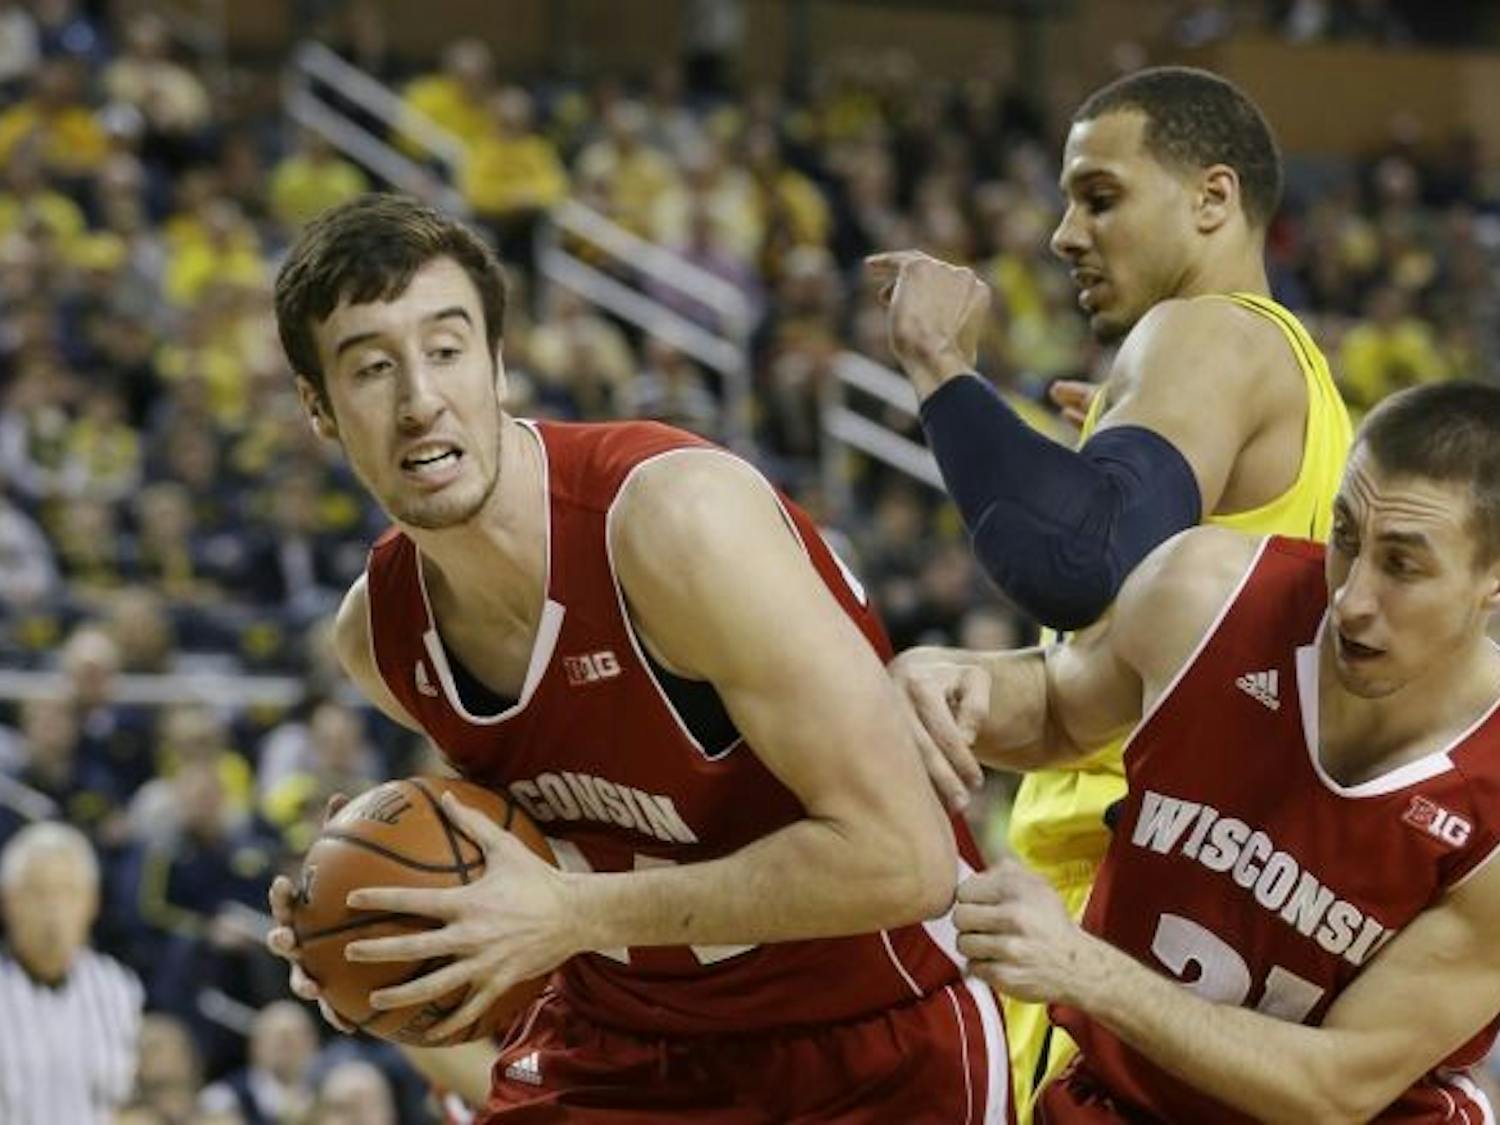 Photos: A big win on the road for Badgers at Michigan